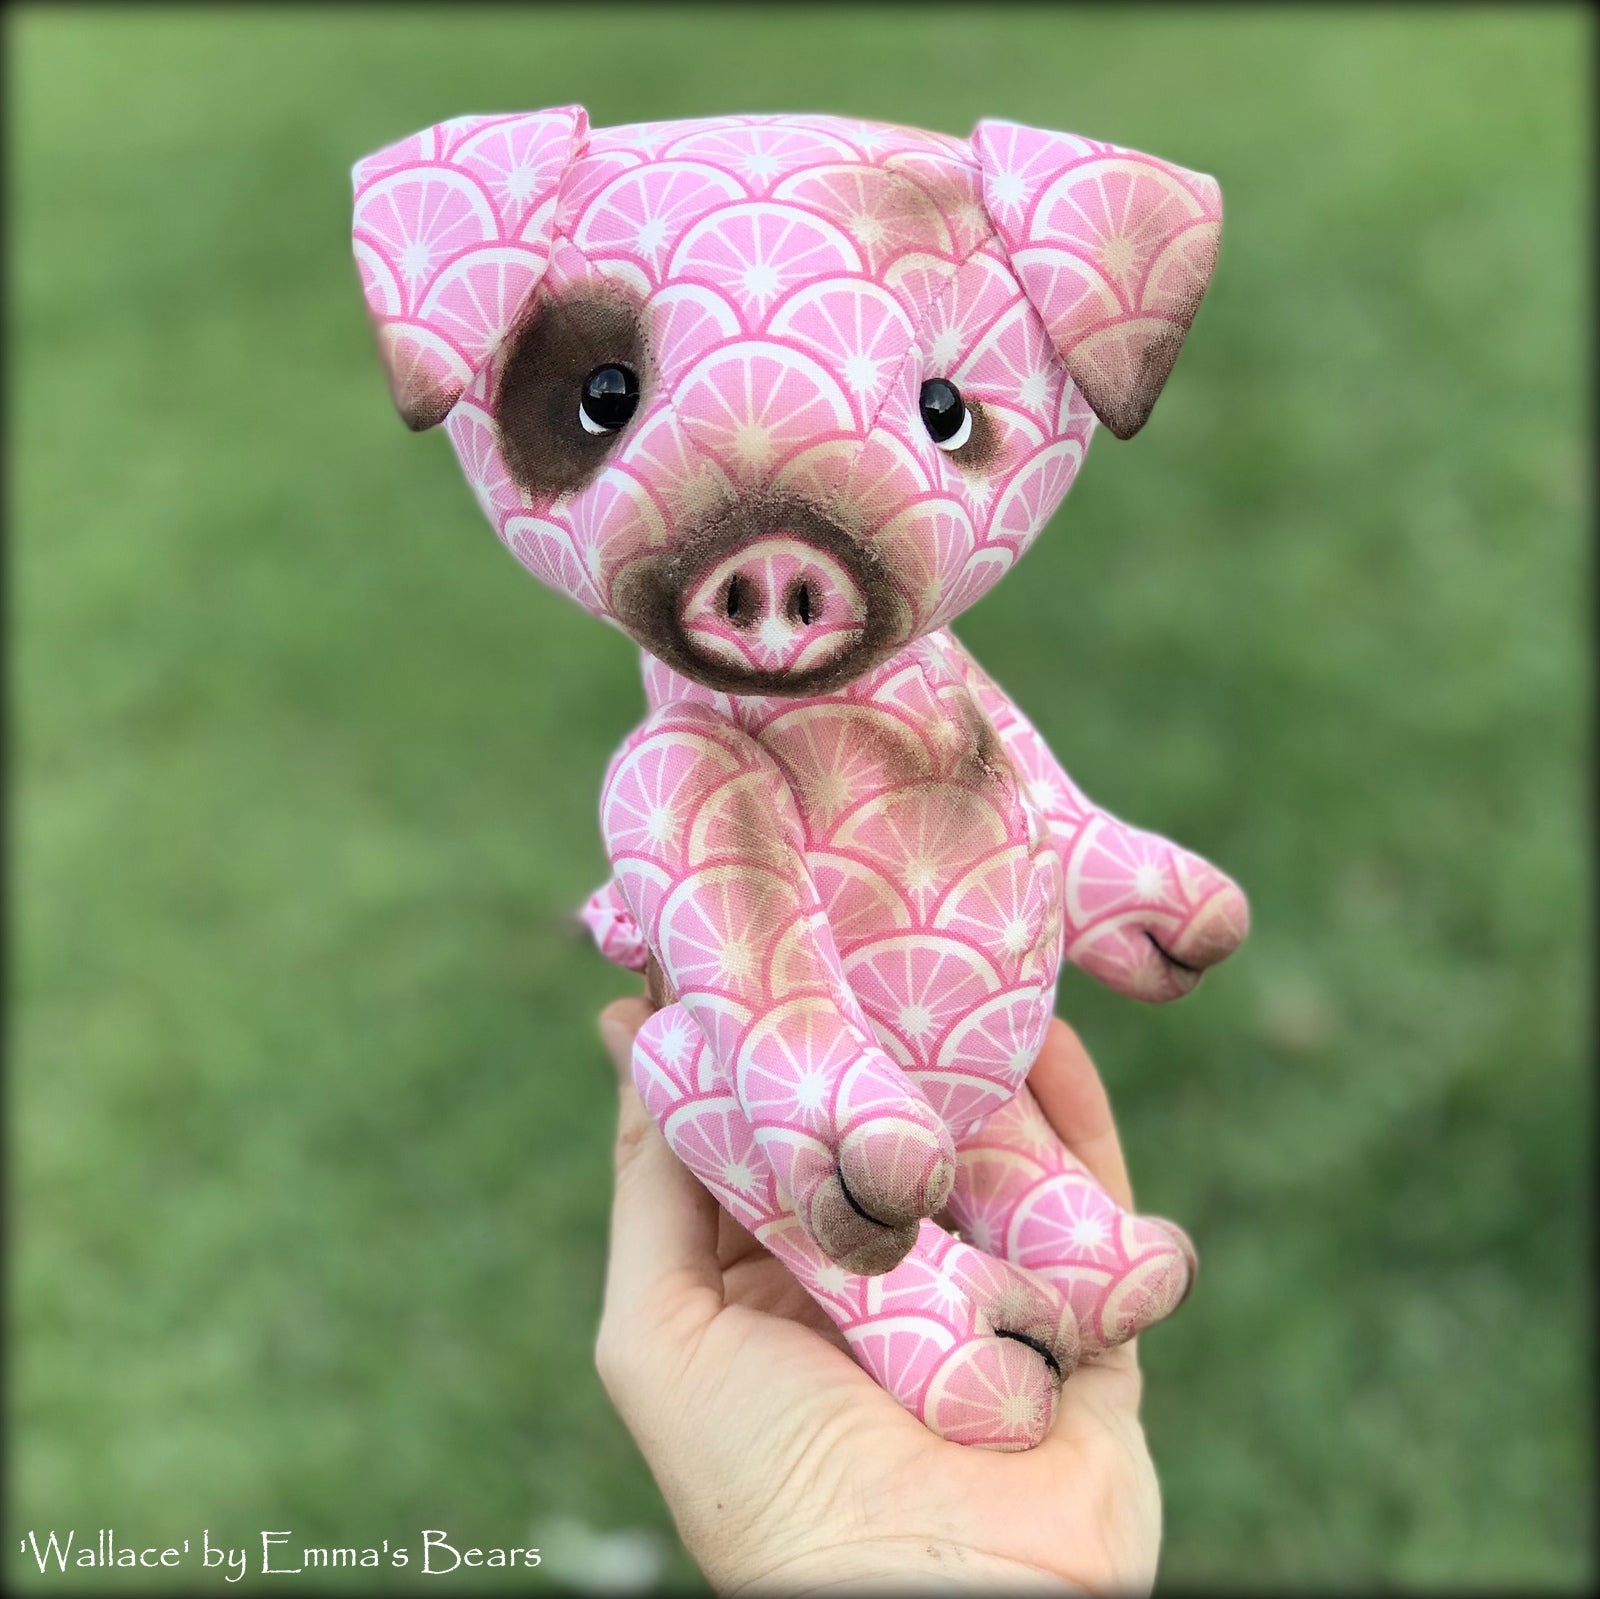 KITS - 9" Wallace Jointed Cotton Pig